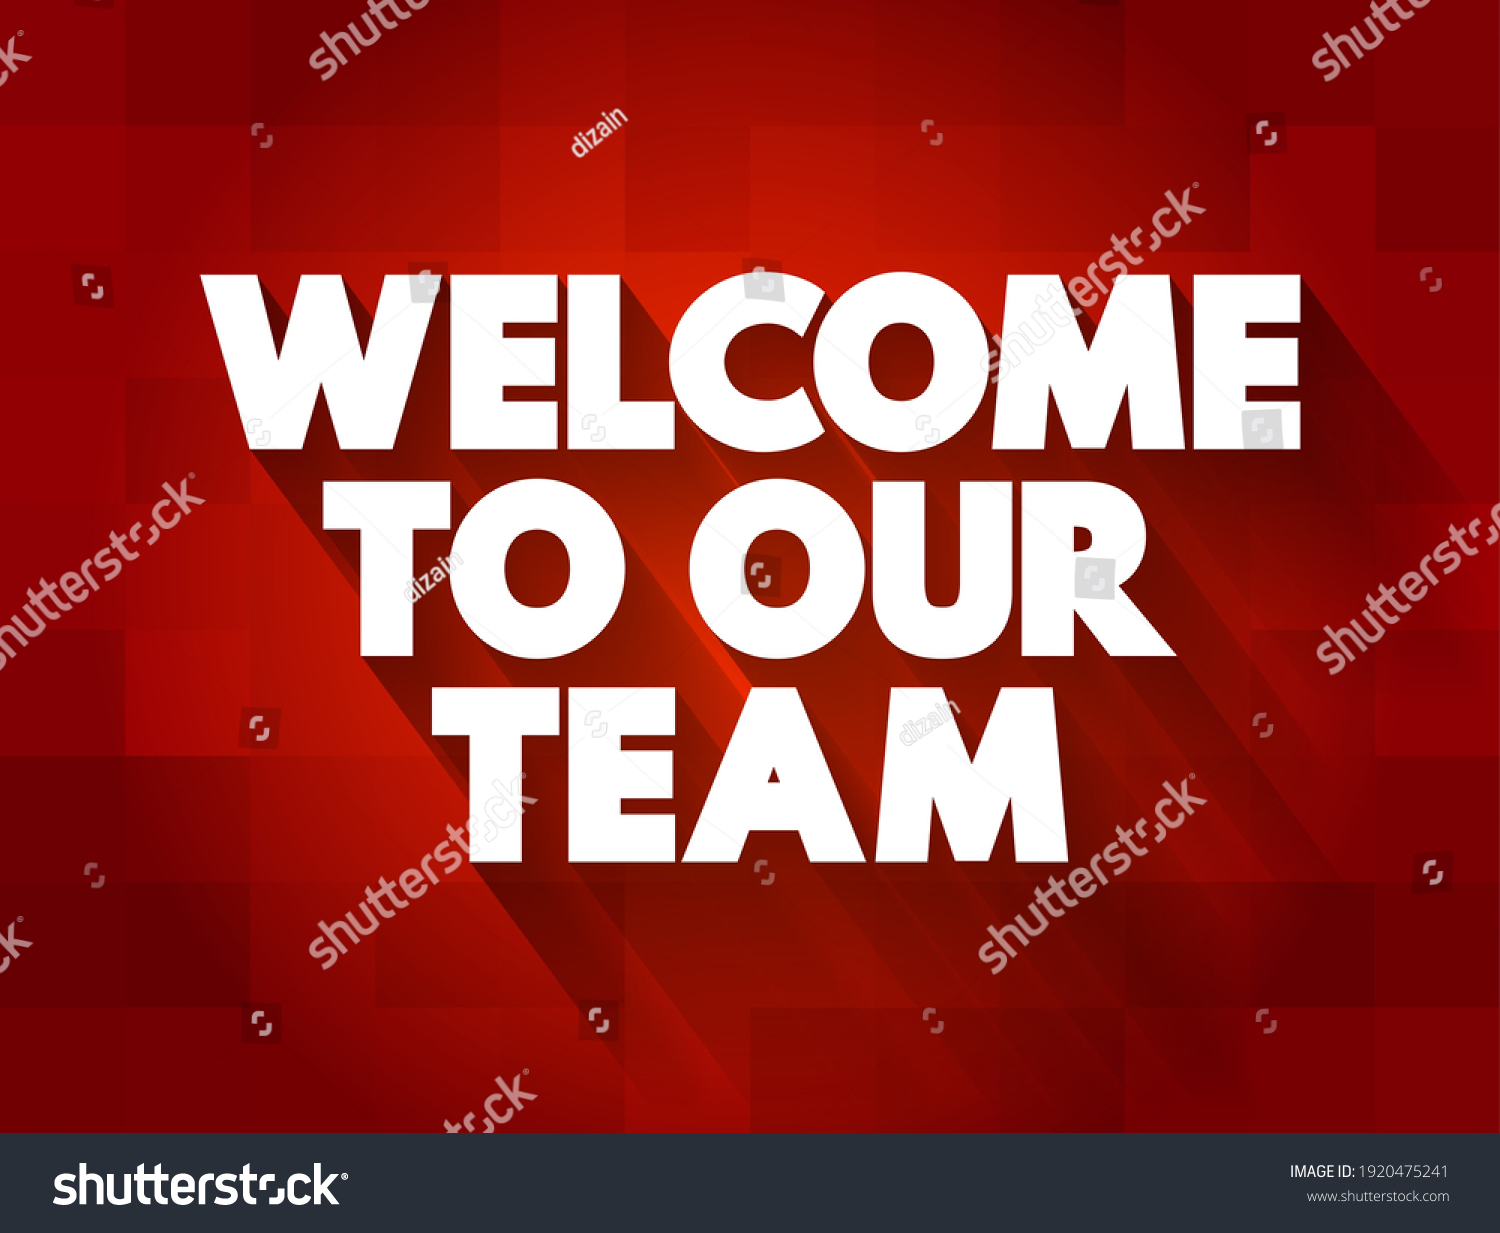 Welcome Our Team Text Quote Concept Stock Vector (Royalty Free ...